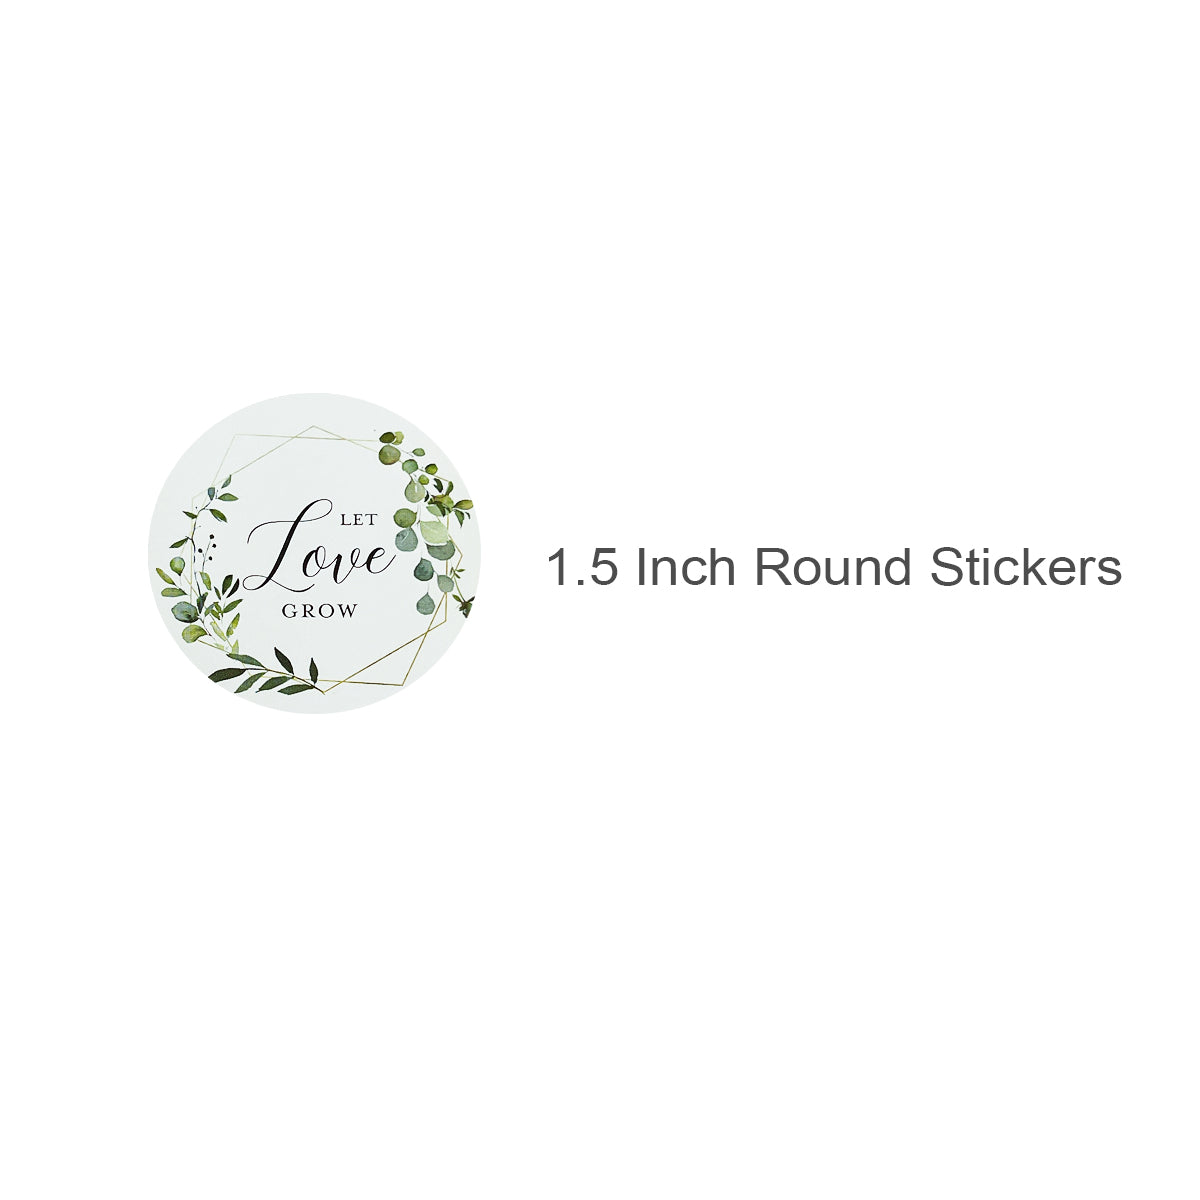 Wrapables 1.5 inch Let Love Grow Stickers Roll, Sealing Stickers and Labels for Cards, Envelopes, Bags, Gift Boxes, Weddings, Baby Showers (500pcs)